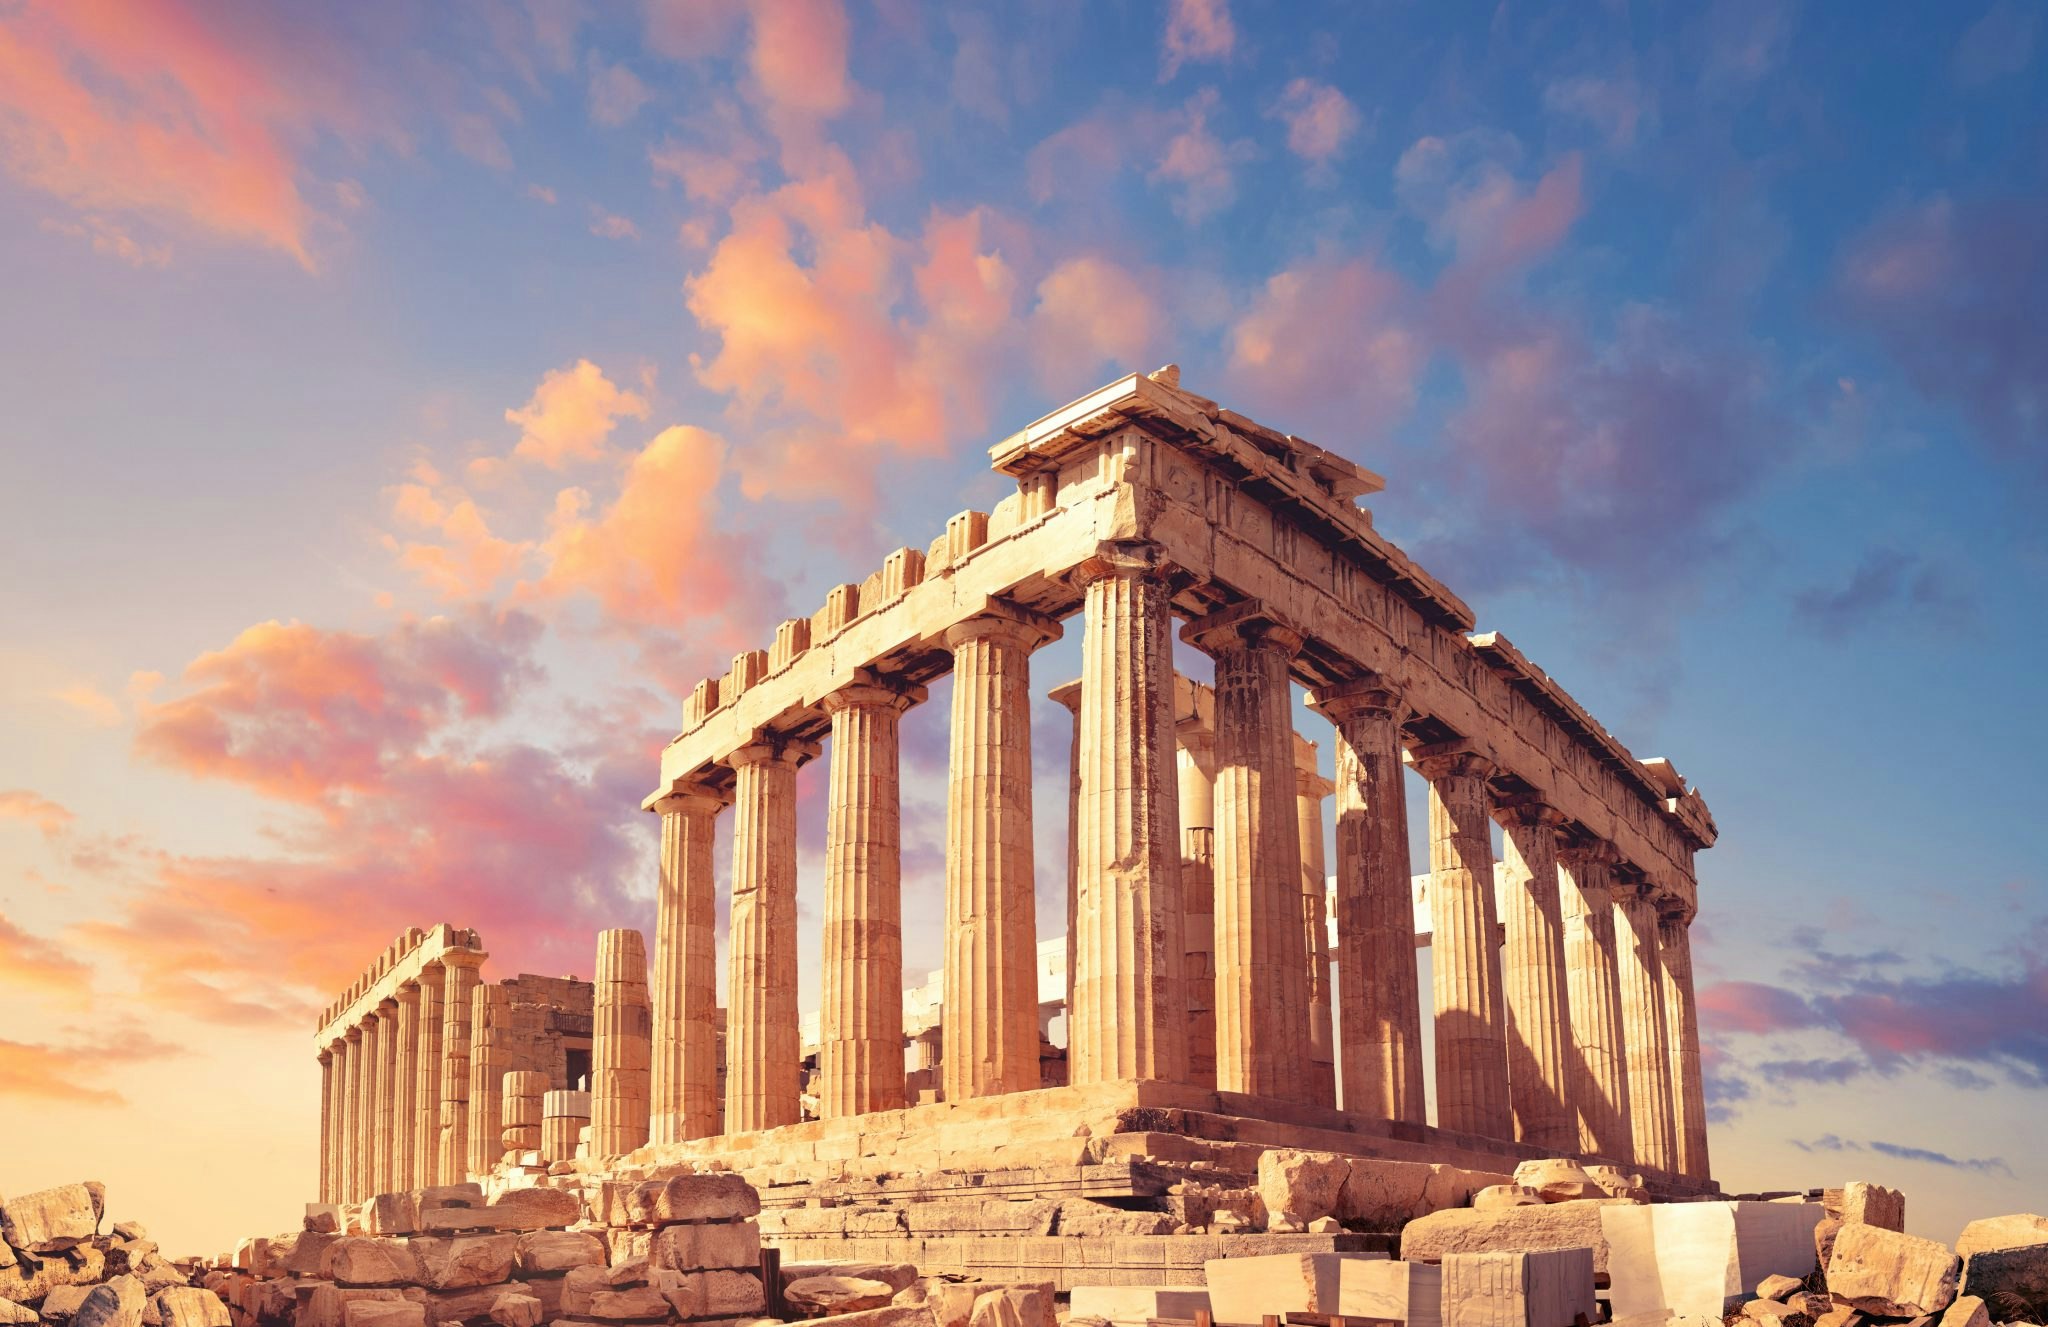 Parthenon temple on a sunset with pink and purple clouds. Acropolis in Athens, Greece